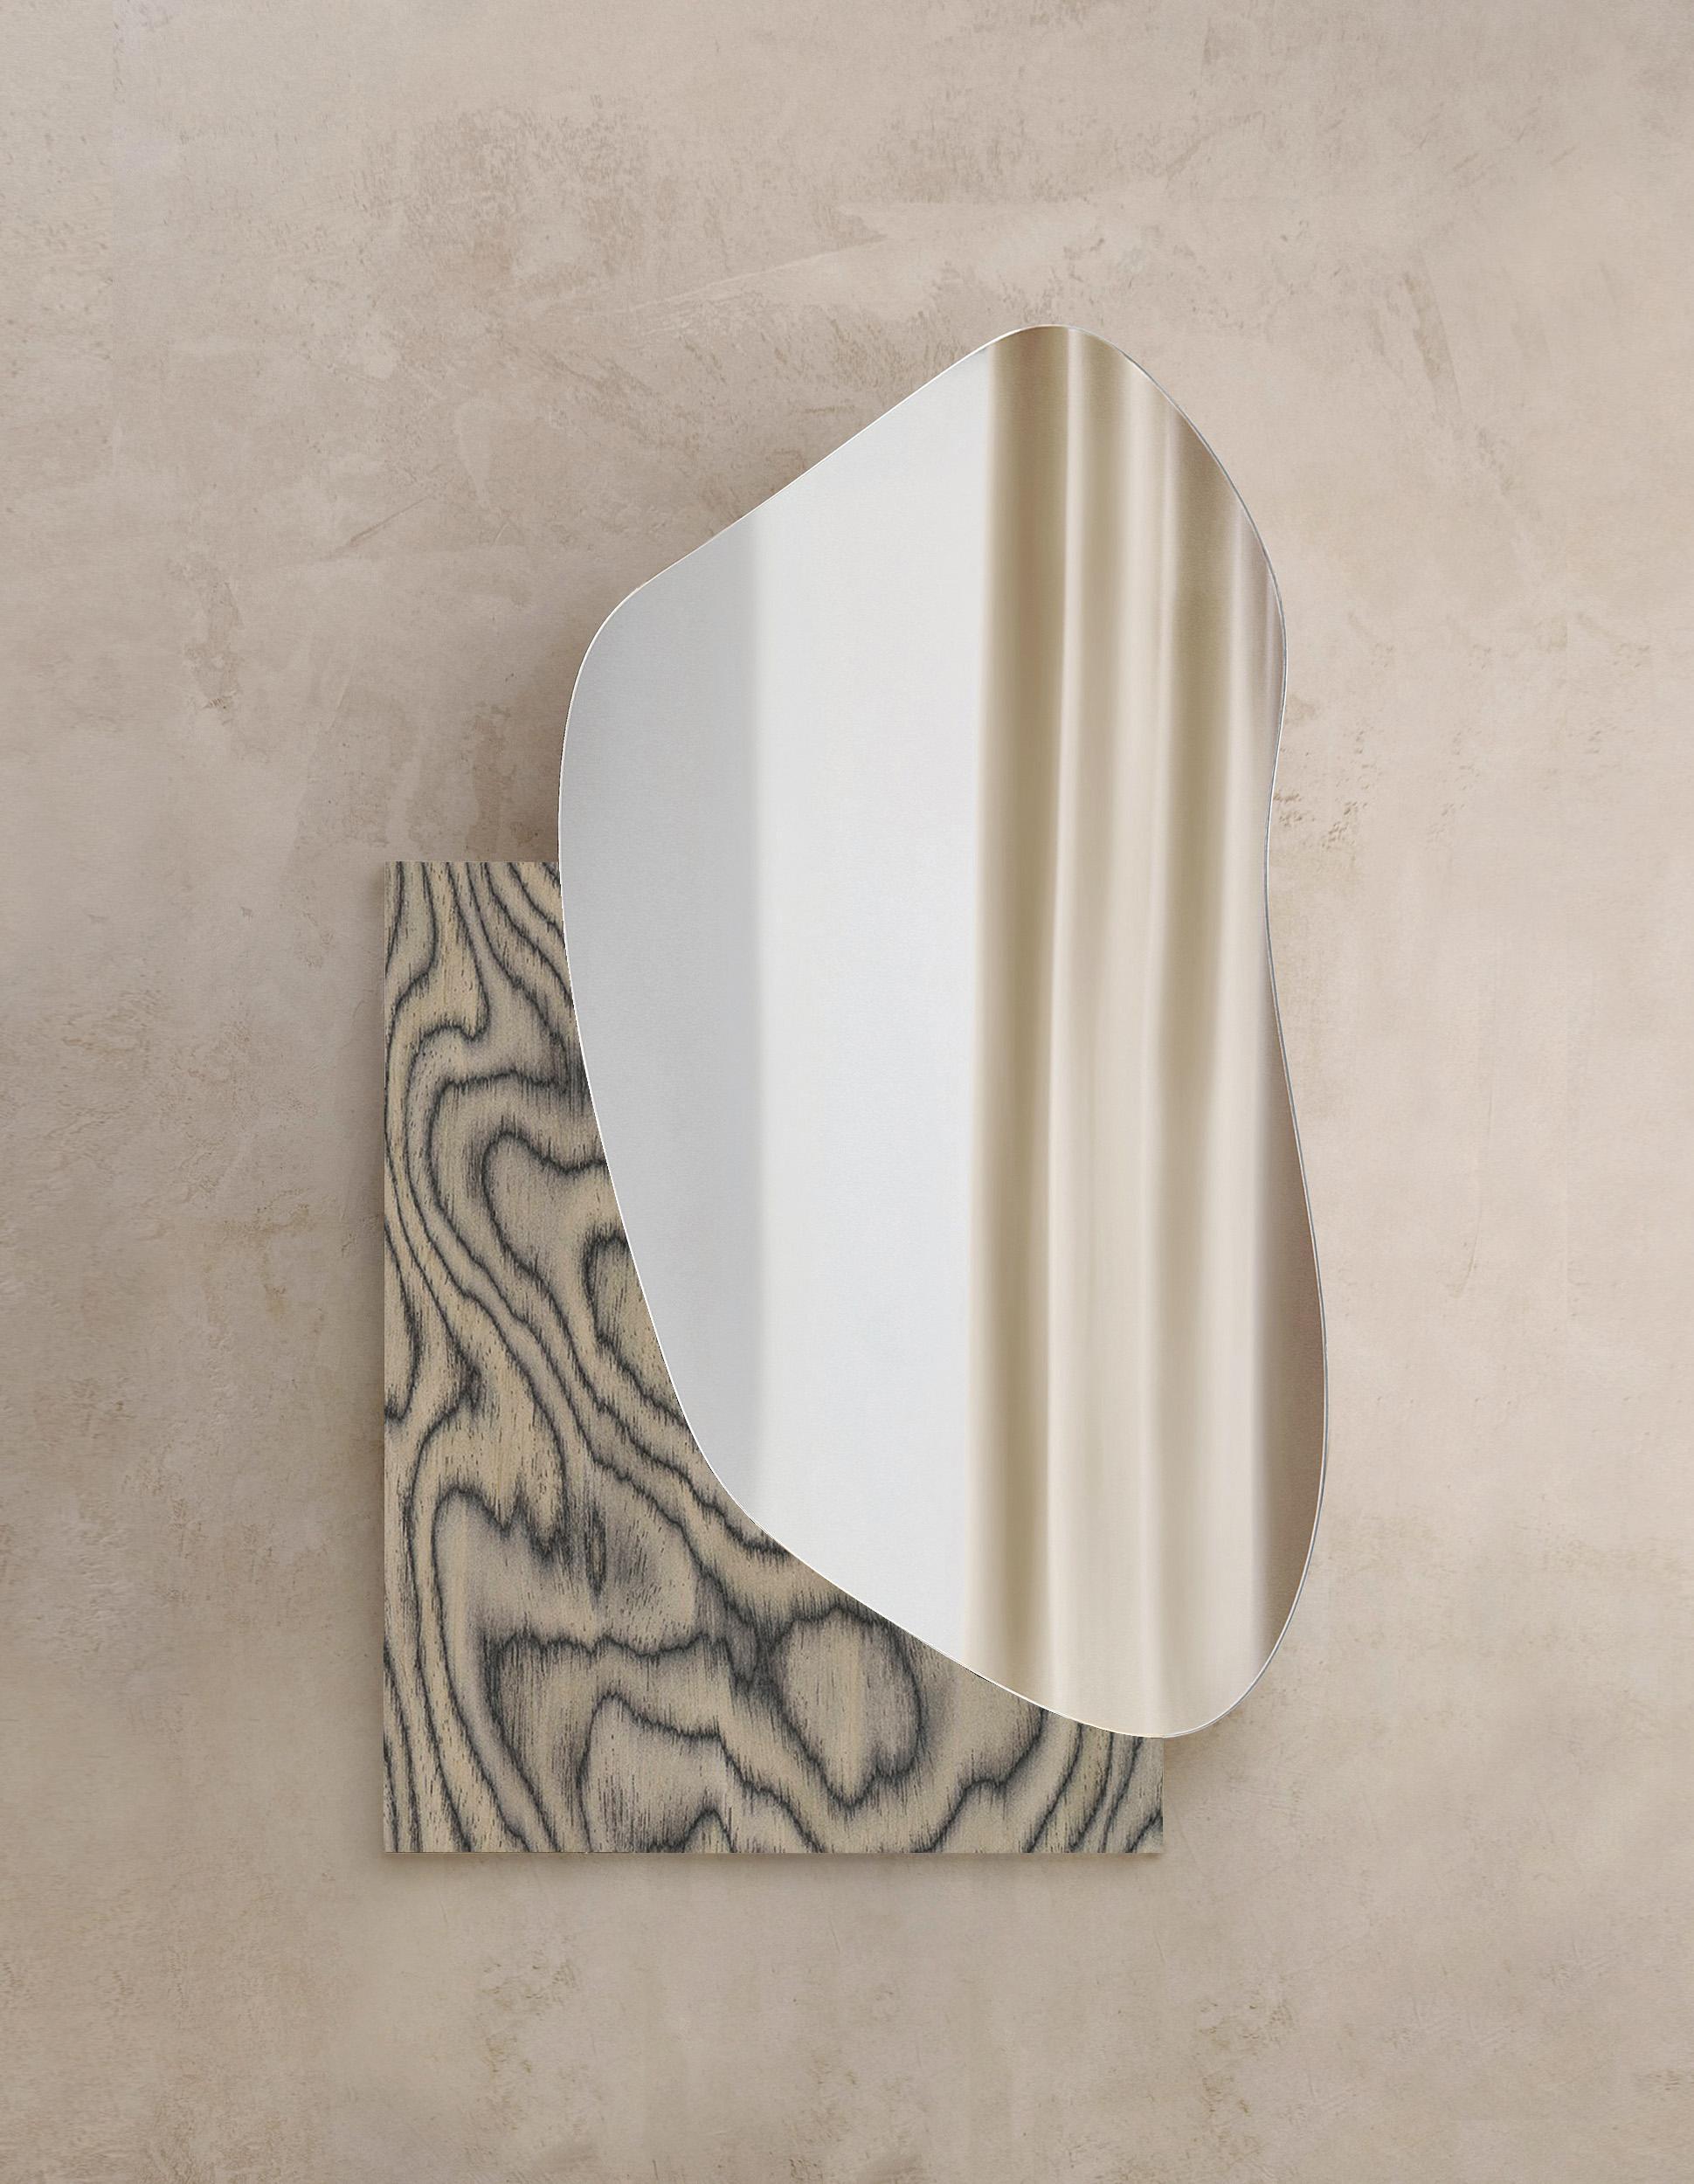 Contemporary Wall Mirror Lake 1
Brand: NOOM
Designers: Maryna Dague & Nathan Baraness.

Type of Mirrors: Optiwhite, Black tint mirror, Copper tint mirror.
Materials for base: Veneered wood, Madrona wood veneer, Burned steel, Stainless steel / Hand